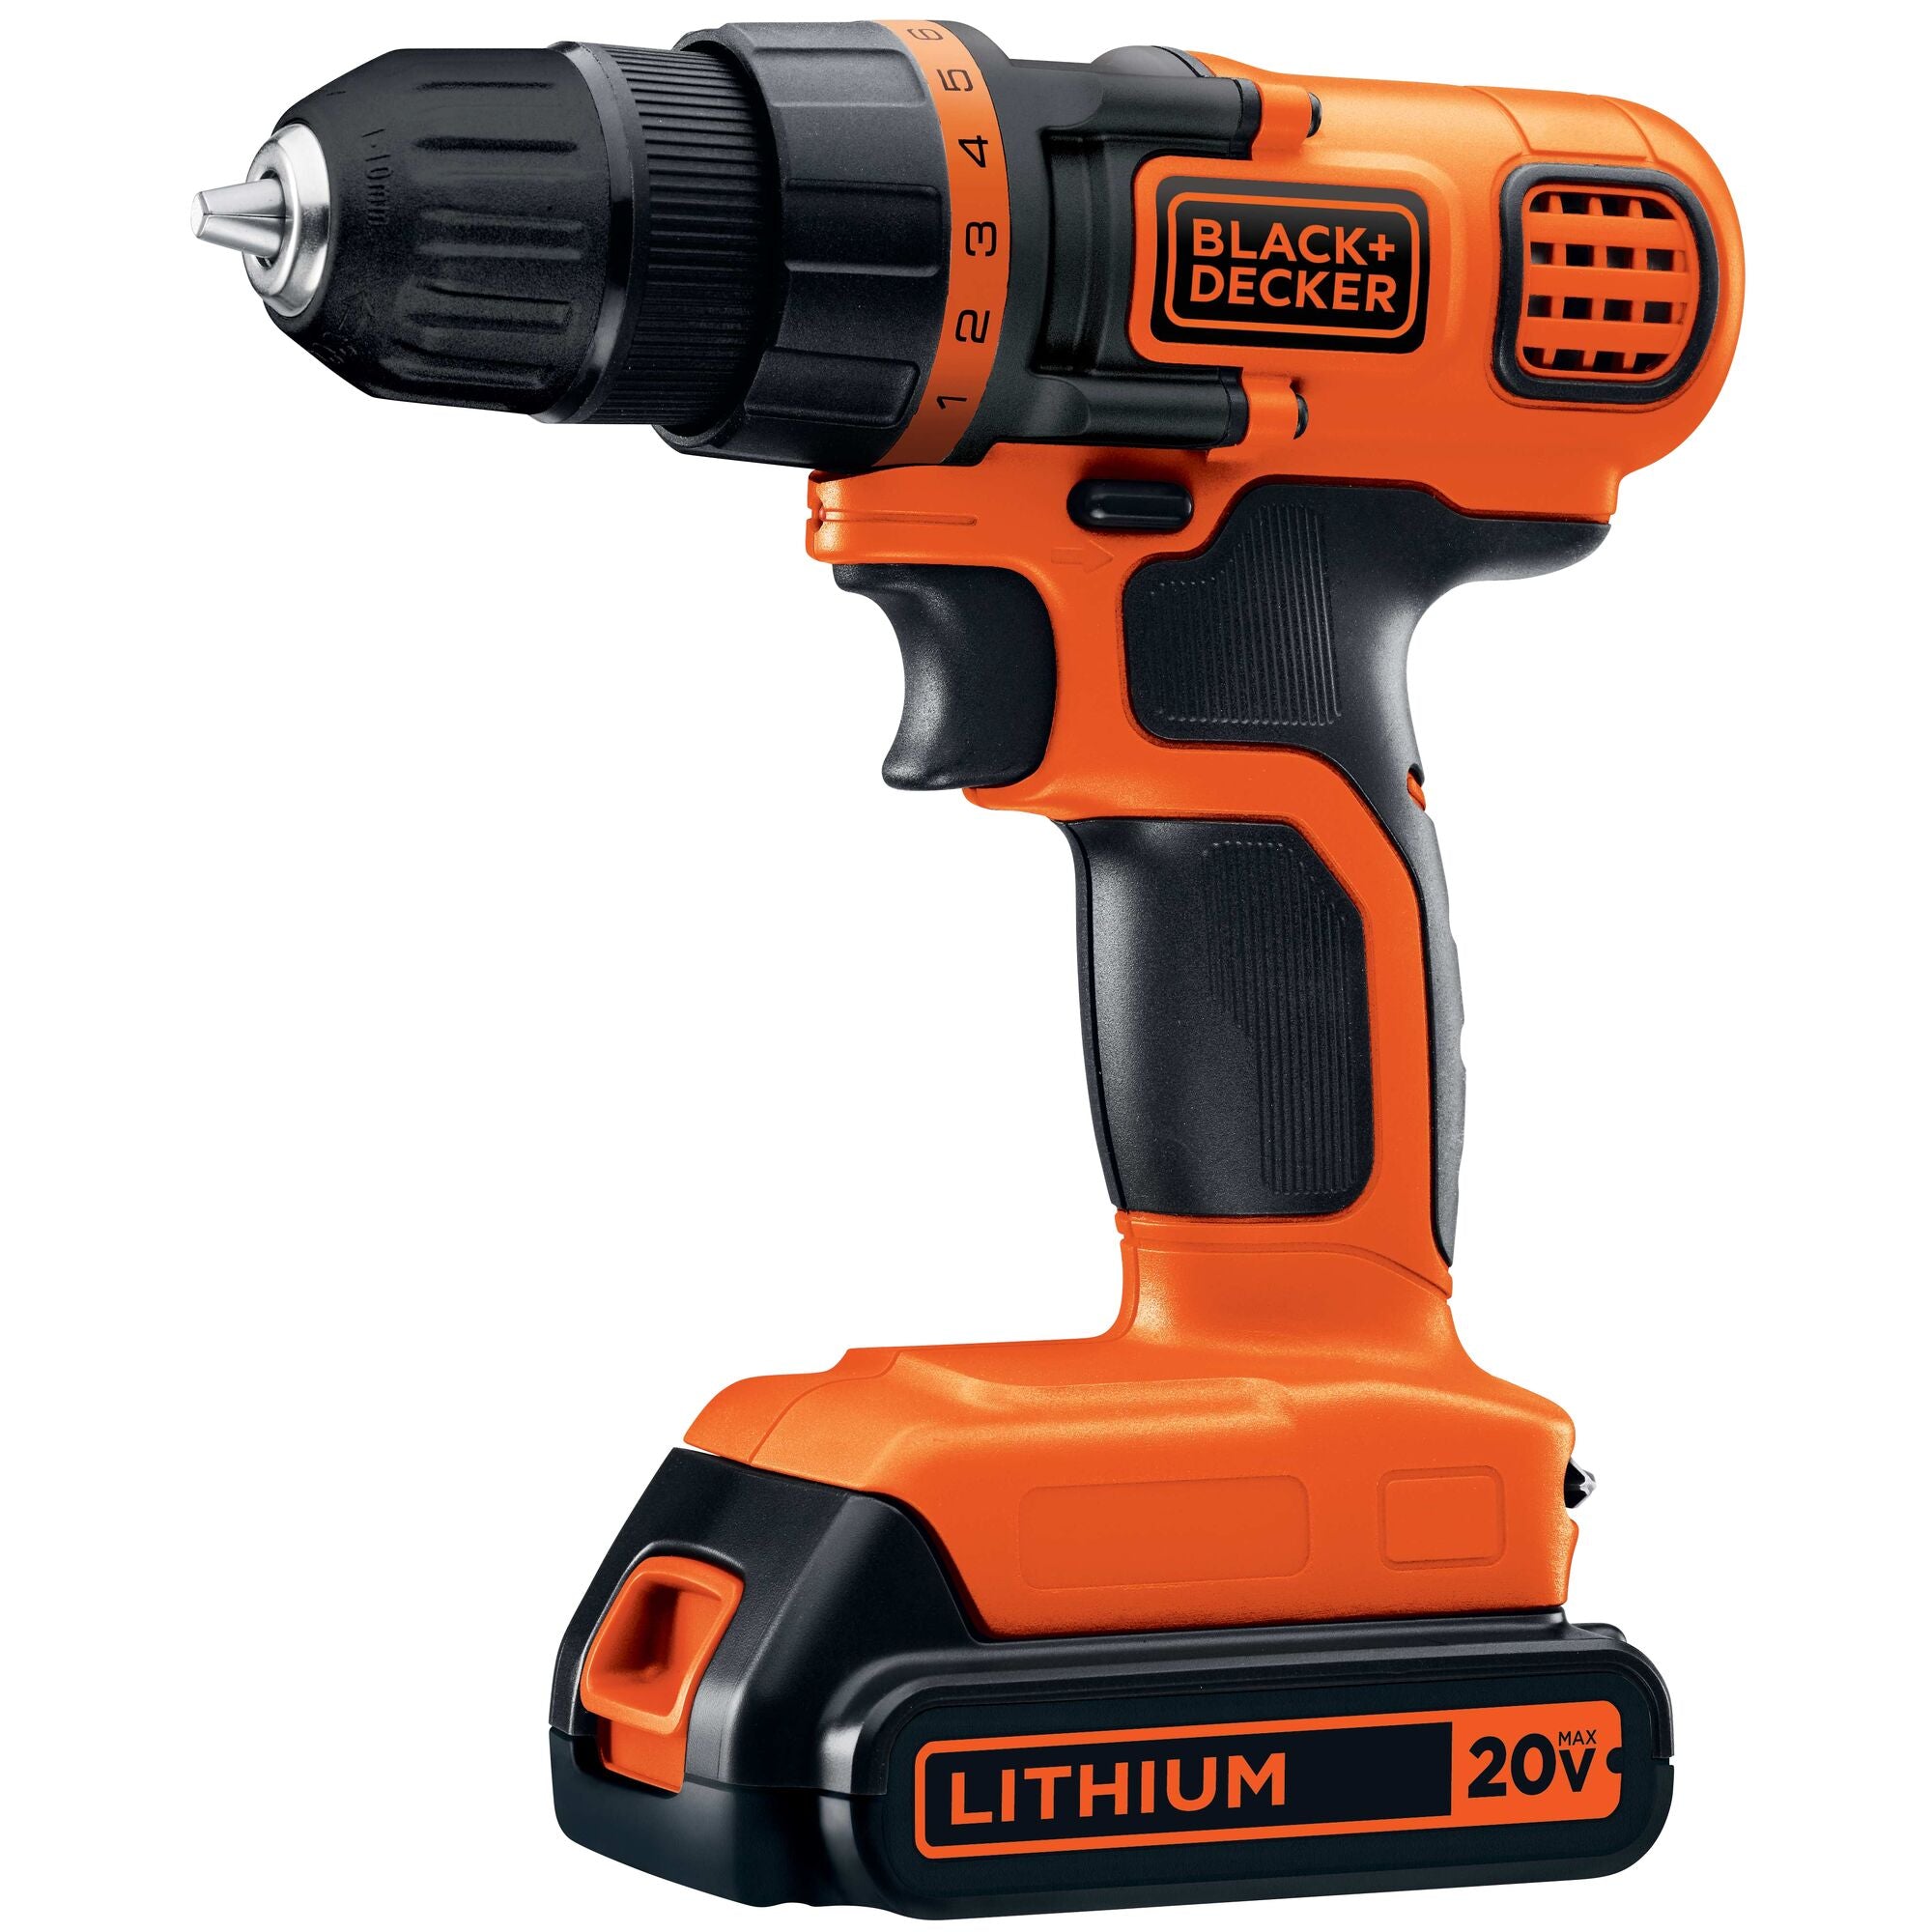 20V Max* Cordless 3/8 In Drill Driver Kit (1) Lithium Ion Battery With  Charger | BLACK+DECKER